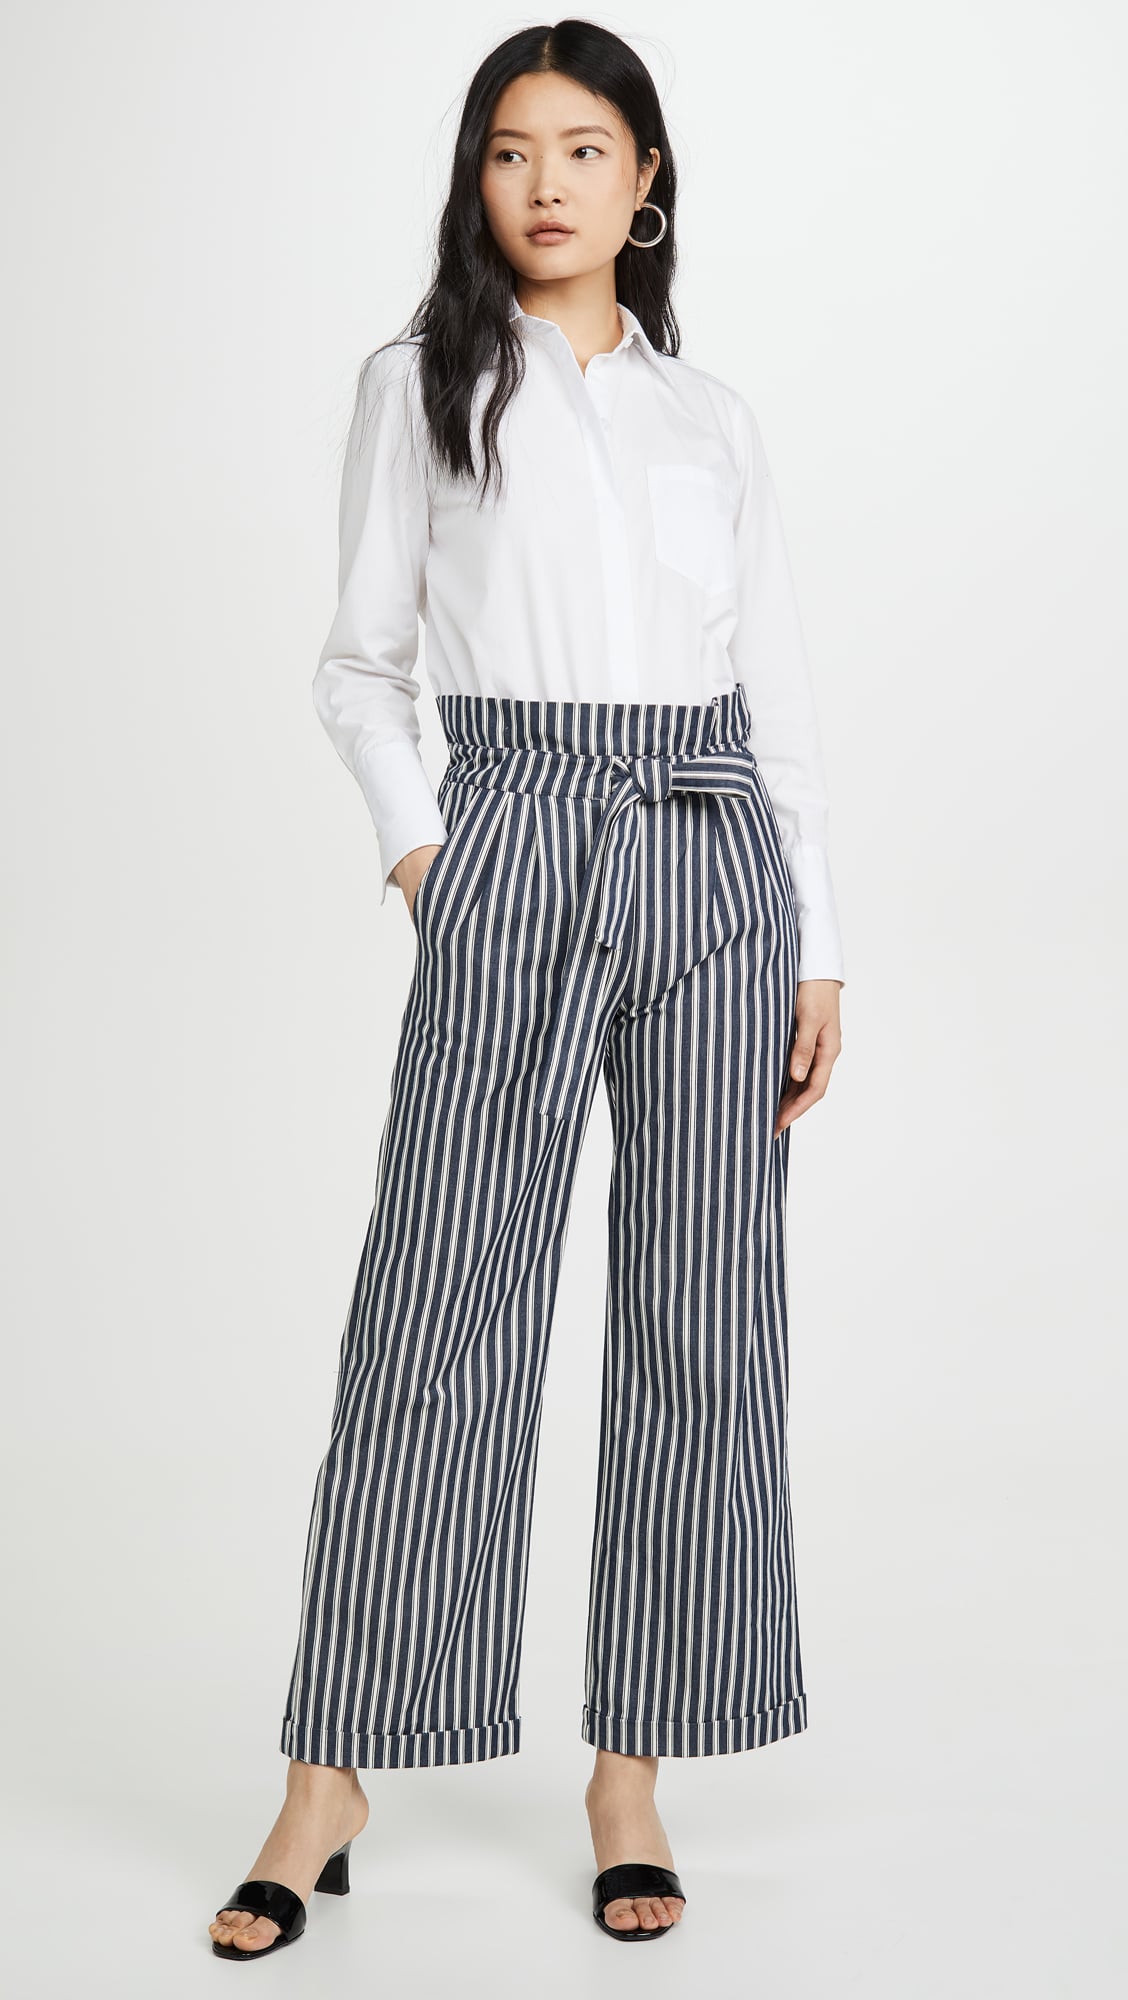 Solid & Striped High Waisted Pants, 16 Pants That You Can  Prime  Right to Your Door, So What Are You Waiting For?